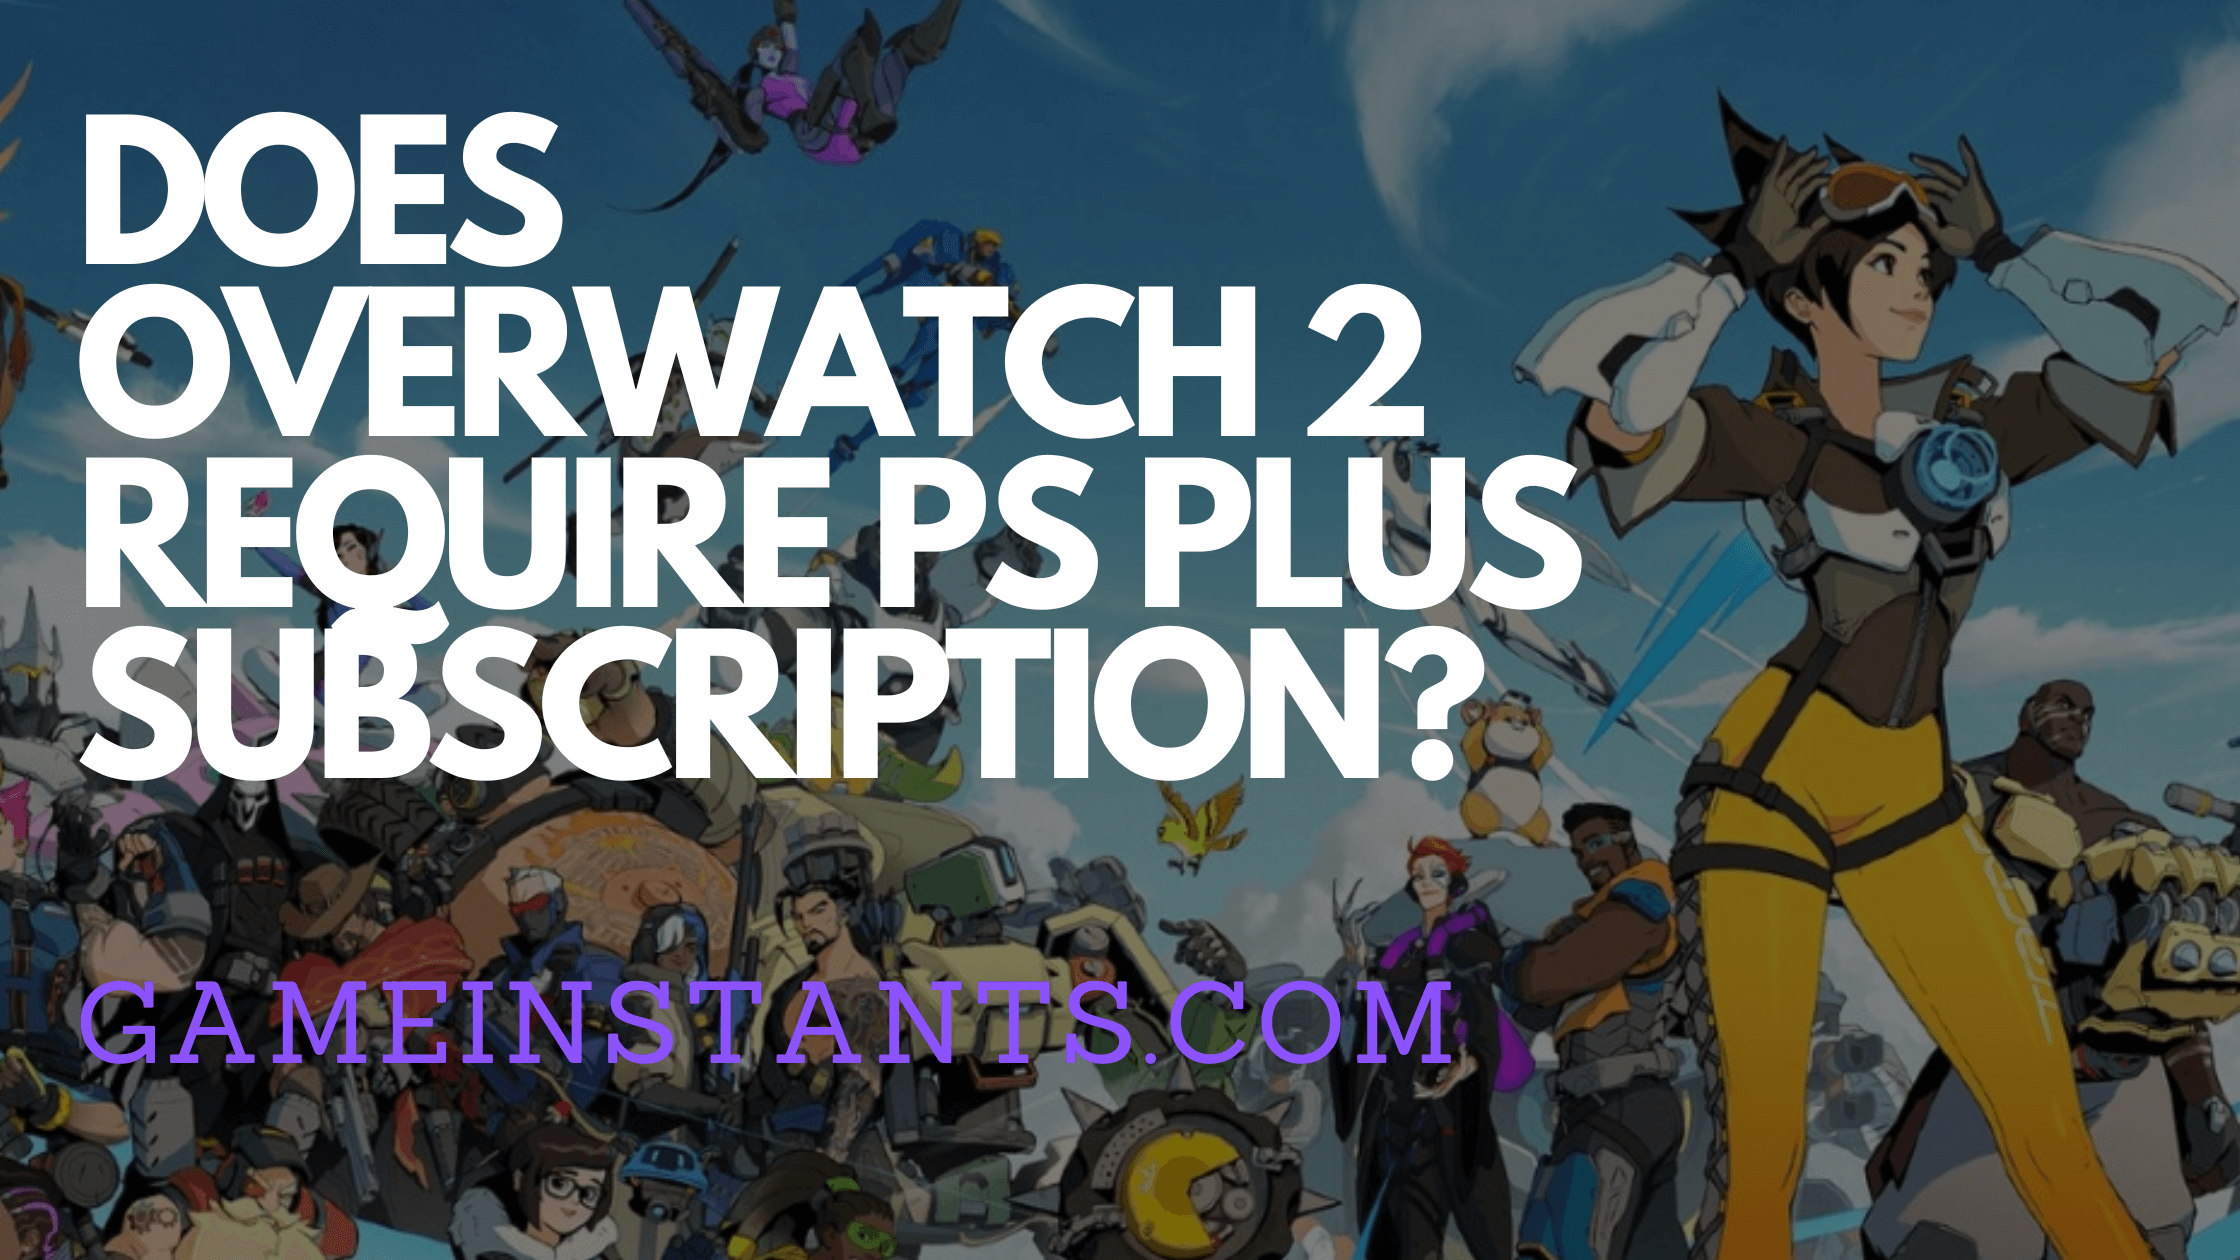 Does Overwatch 2 Require PS Plus Subscription